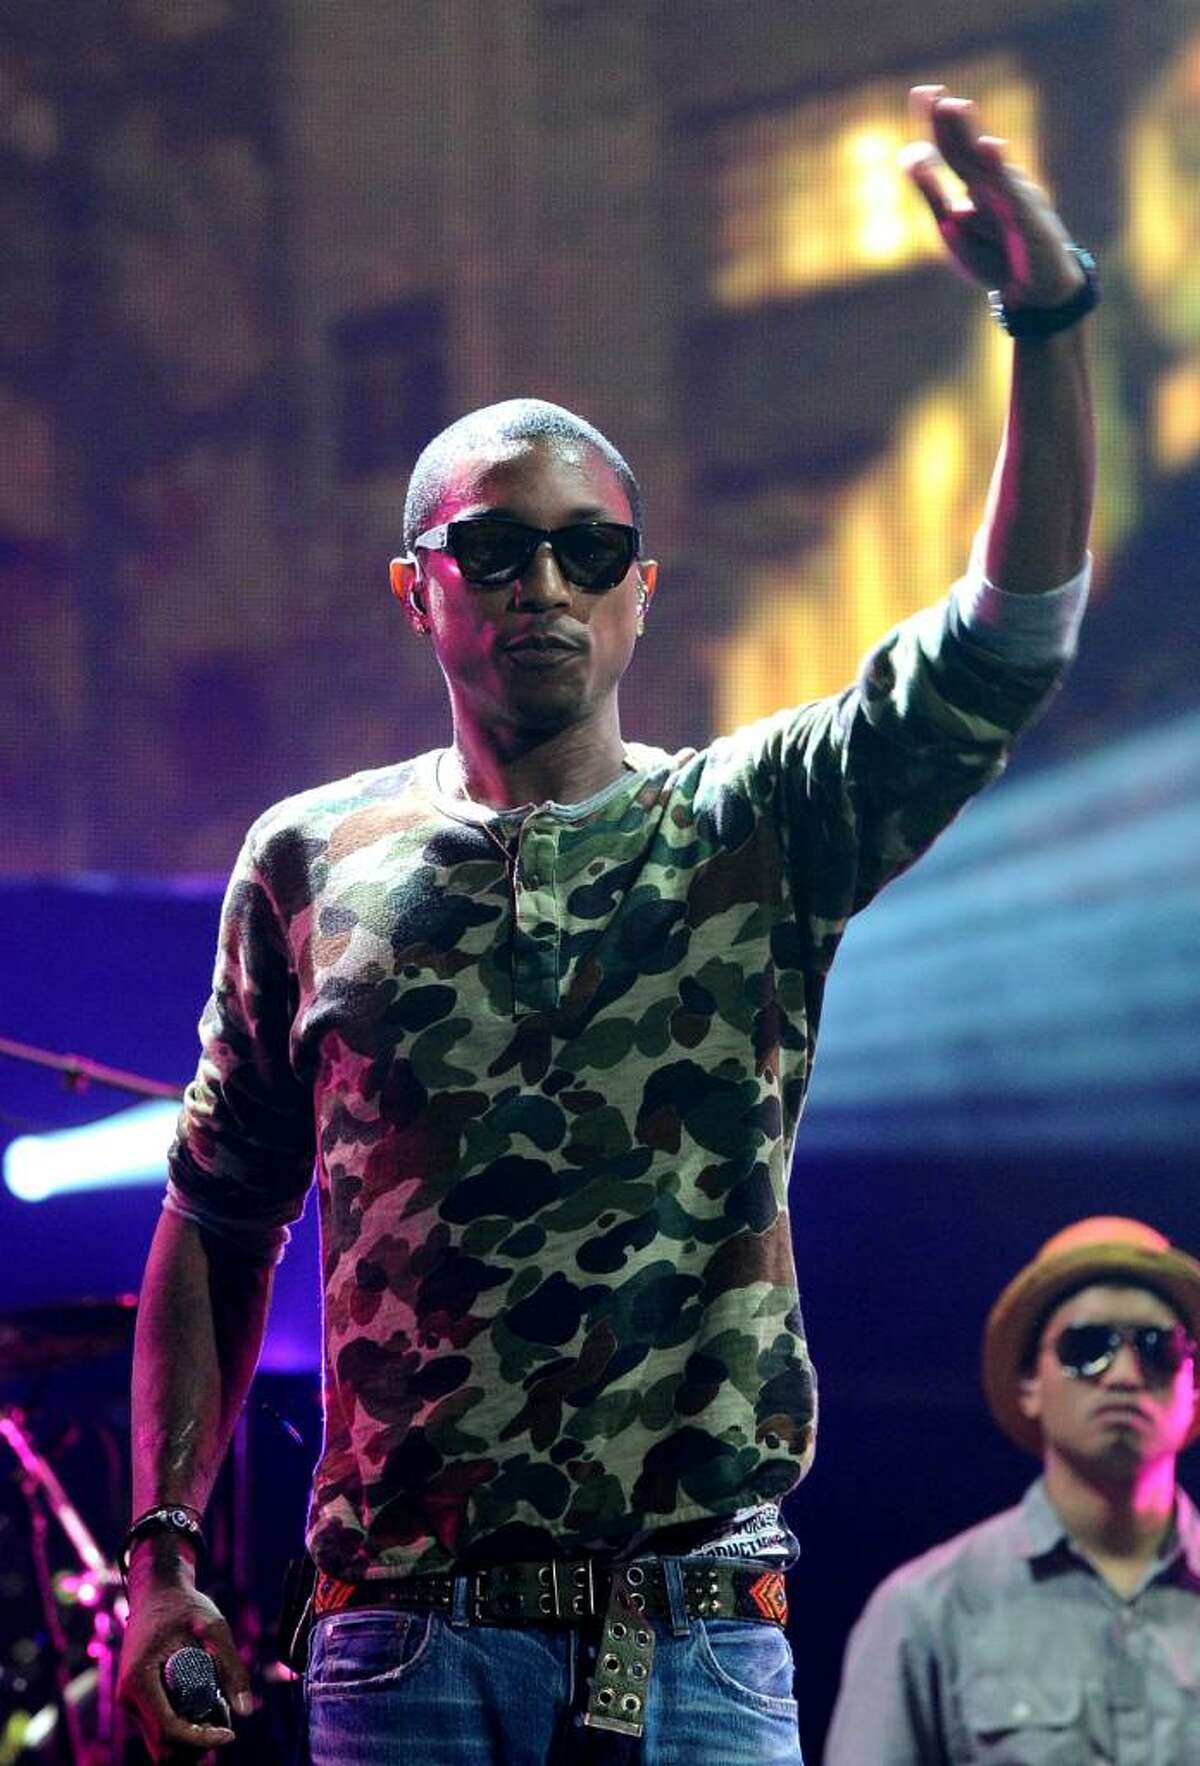 LOS ANGELES, CA - JUNE 14: Pharrell Williams of N.E.R.D performs onstage at the Activision E3 2010 preview held at Staples Center on June 14, 2010 in Los Angeles, California. (Photo by Michael Buckner/Getty Images for Activision) *** Local Caption *** Pharrell Williams